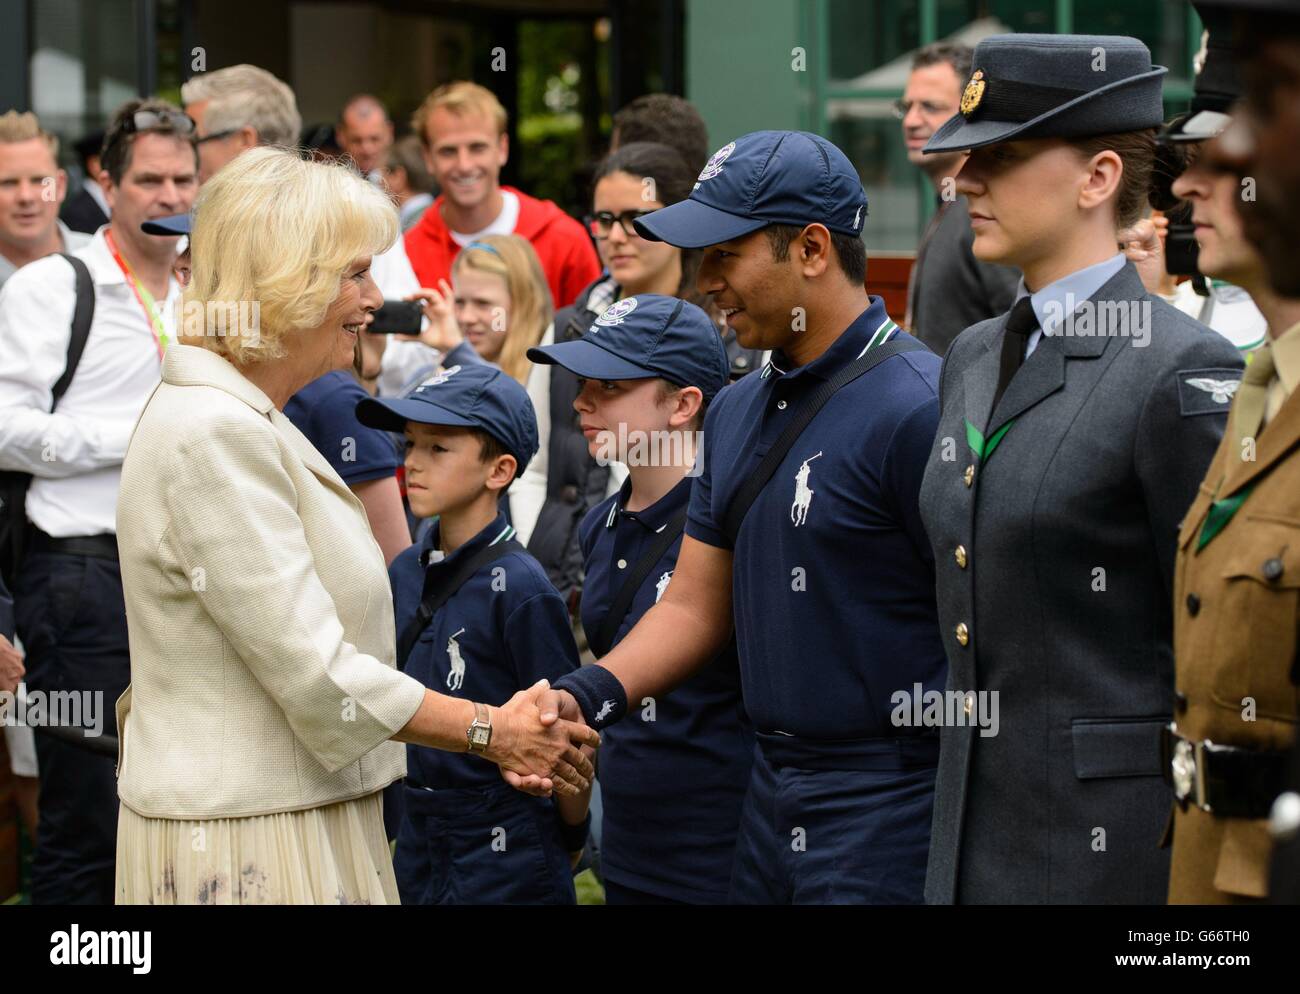 The Duchess of Cornwall meets ballboy Dhilan Patel during a visit to the Wimbledon Tennis Championships at the All England Lawn Tennis and Croquet Club, Wimbledon. Stock Photo